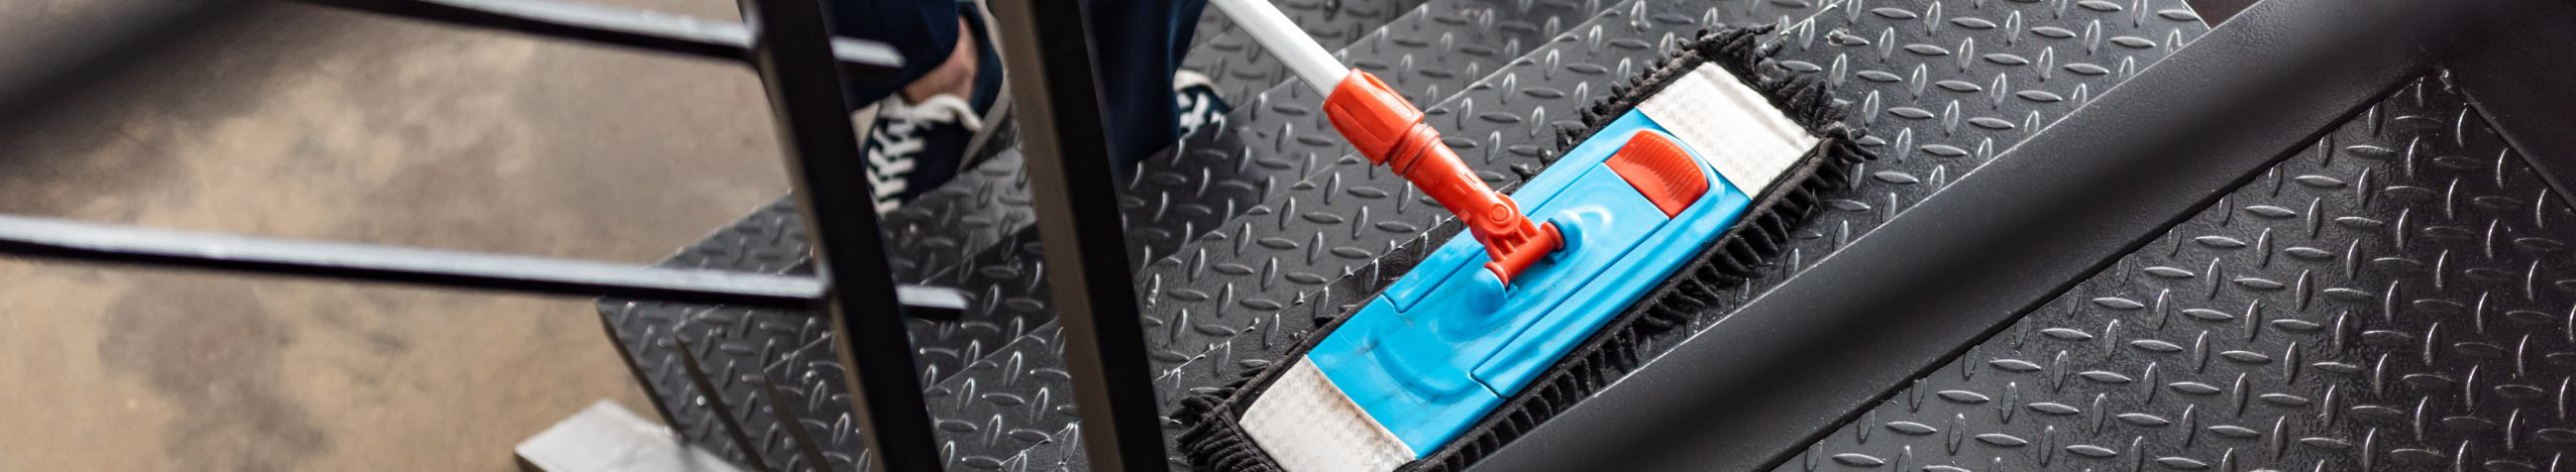 We provide meticulous cleaning services ranging from routine home cleaning to specialized post-construction and large-scale cleaning operations.